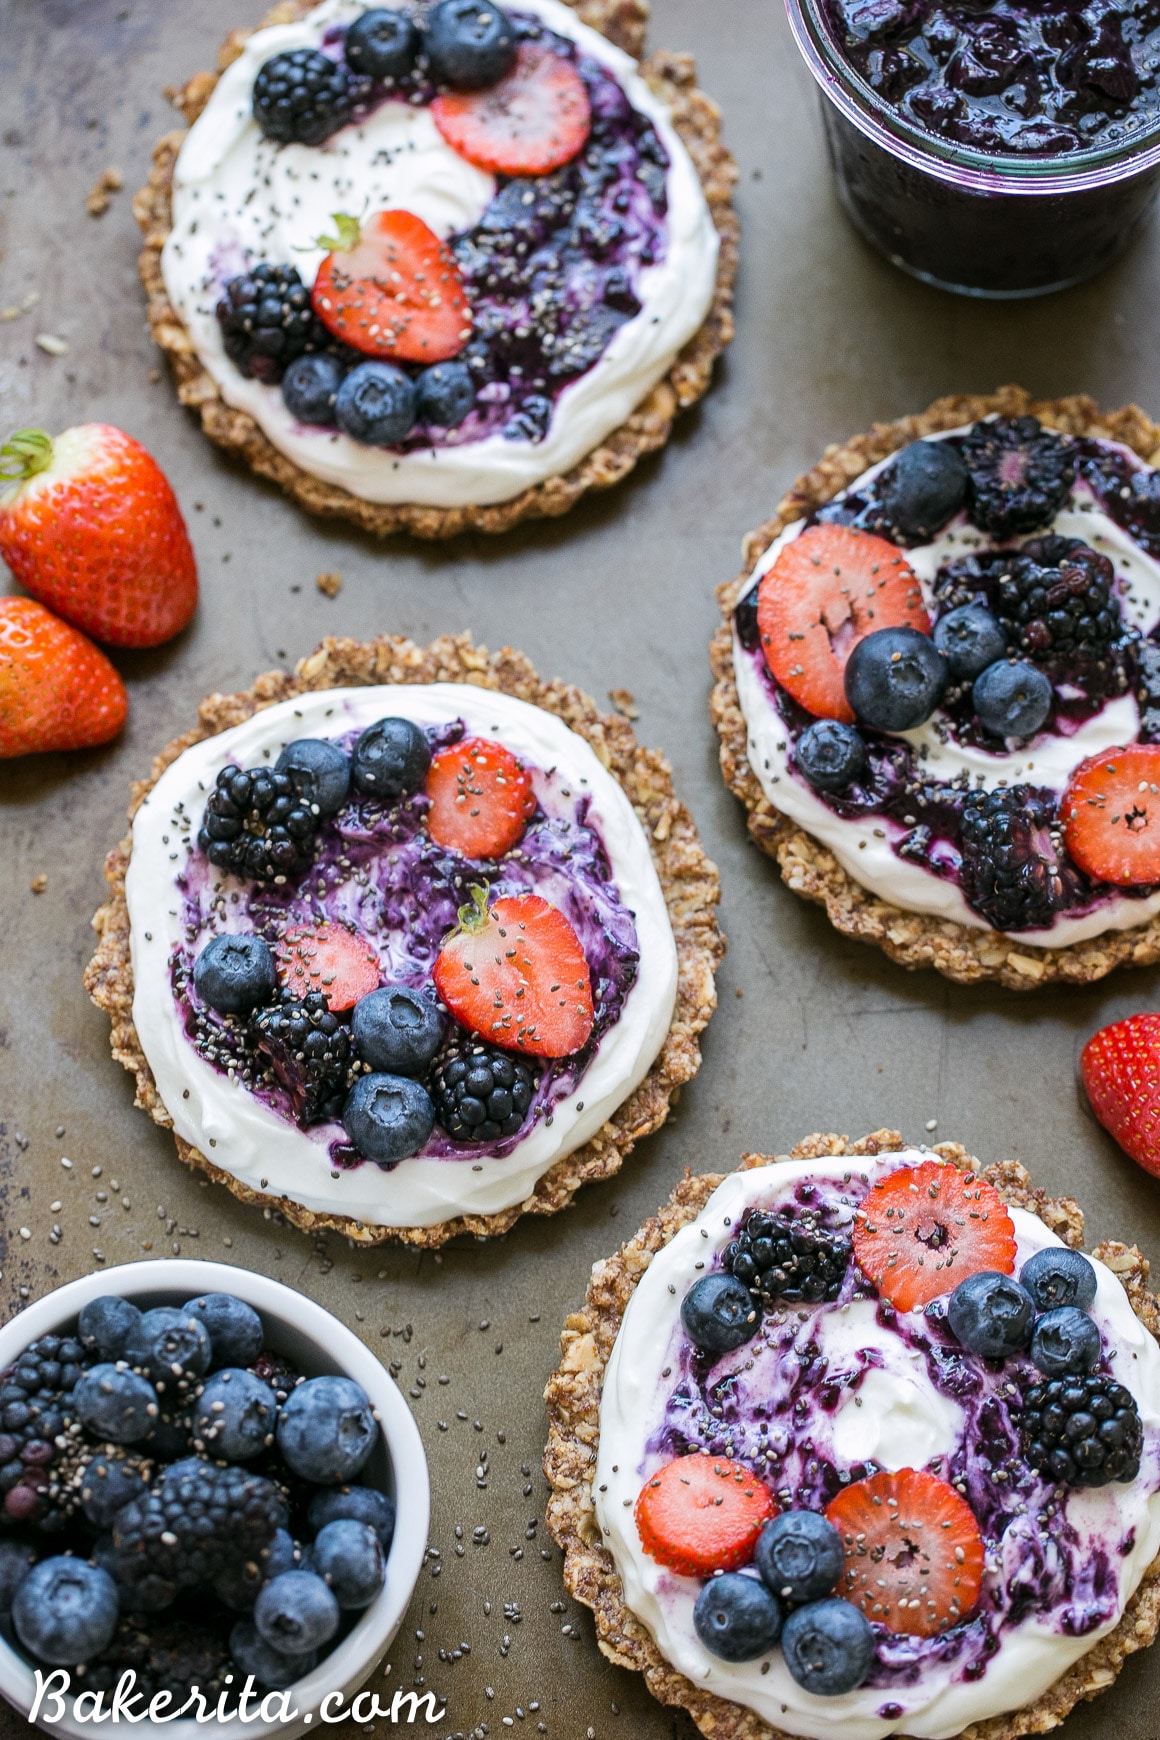 These Granola Crust Breakfast Tarts are topped with Greek yogurt and fresh berries for a fun and filling breakfast! This gluten-free and refined sugar-free twist on a classic parfait looks beautiful and tastes even better.